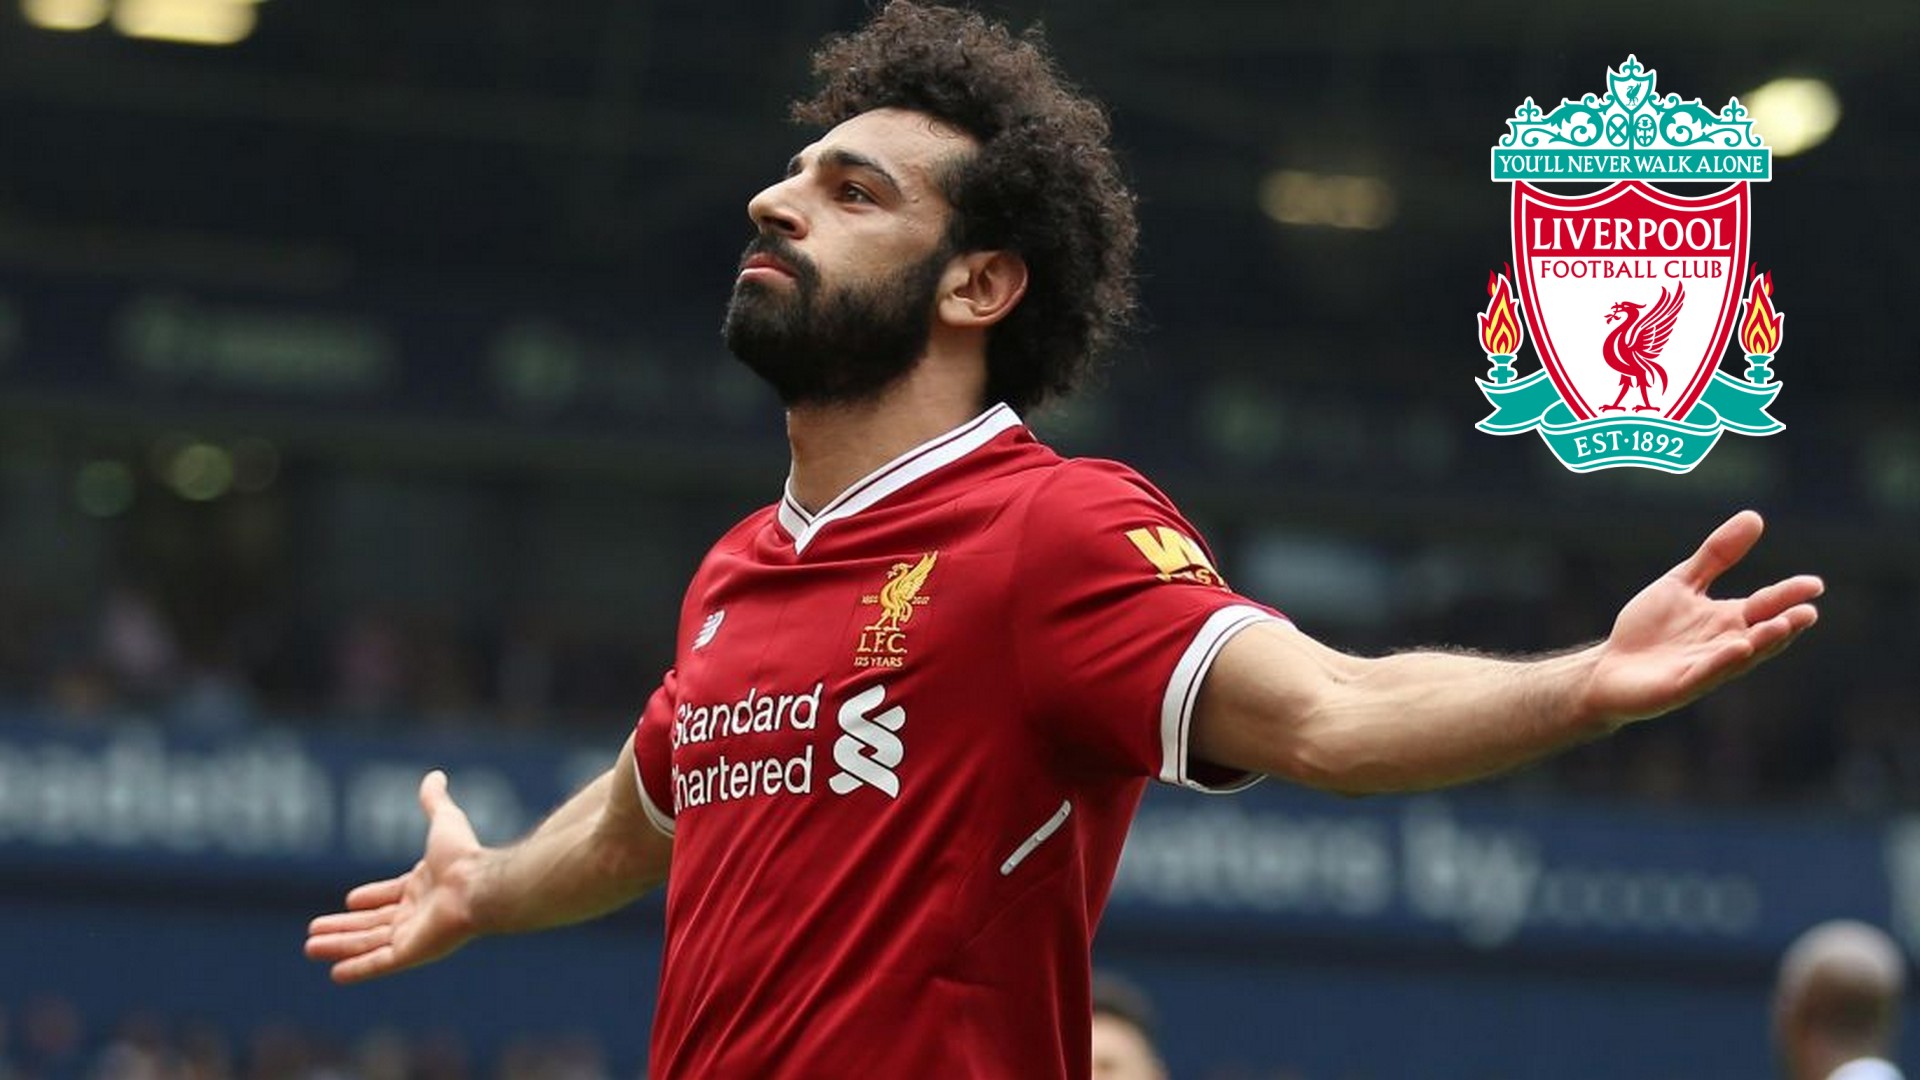 HD Wallpaper Mohamed Salah Liverpool with image resolution 1920x1080 pixel. You can make this wallpaper for your Desktop Computer Backgrounds, Mac Wallpapers, Android Lock screen or iPhone Screensavers